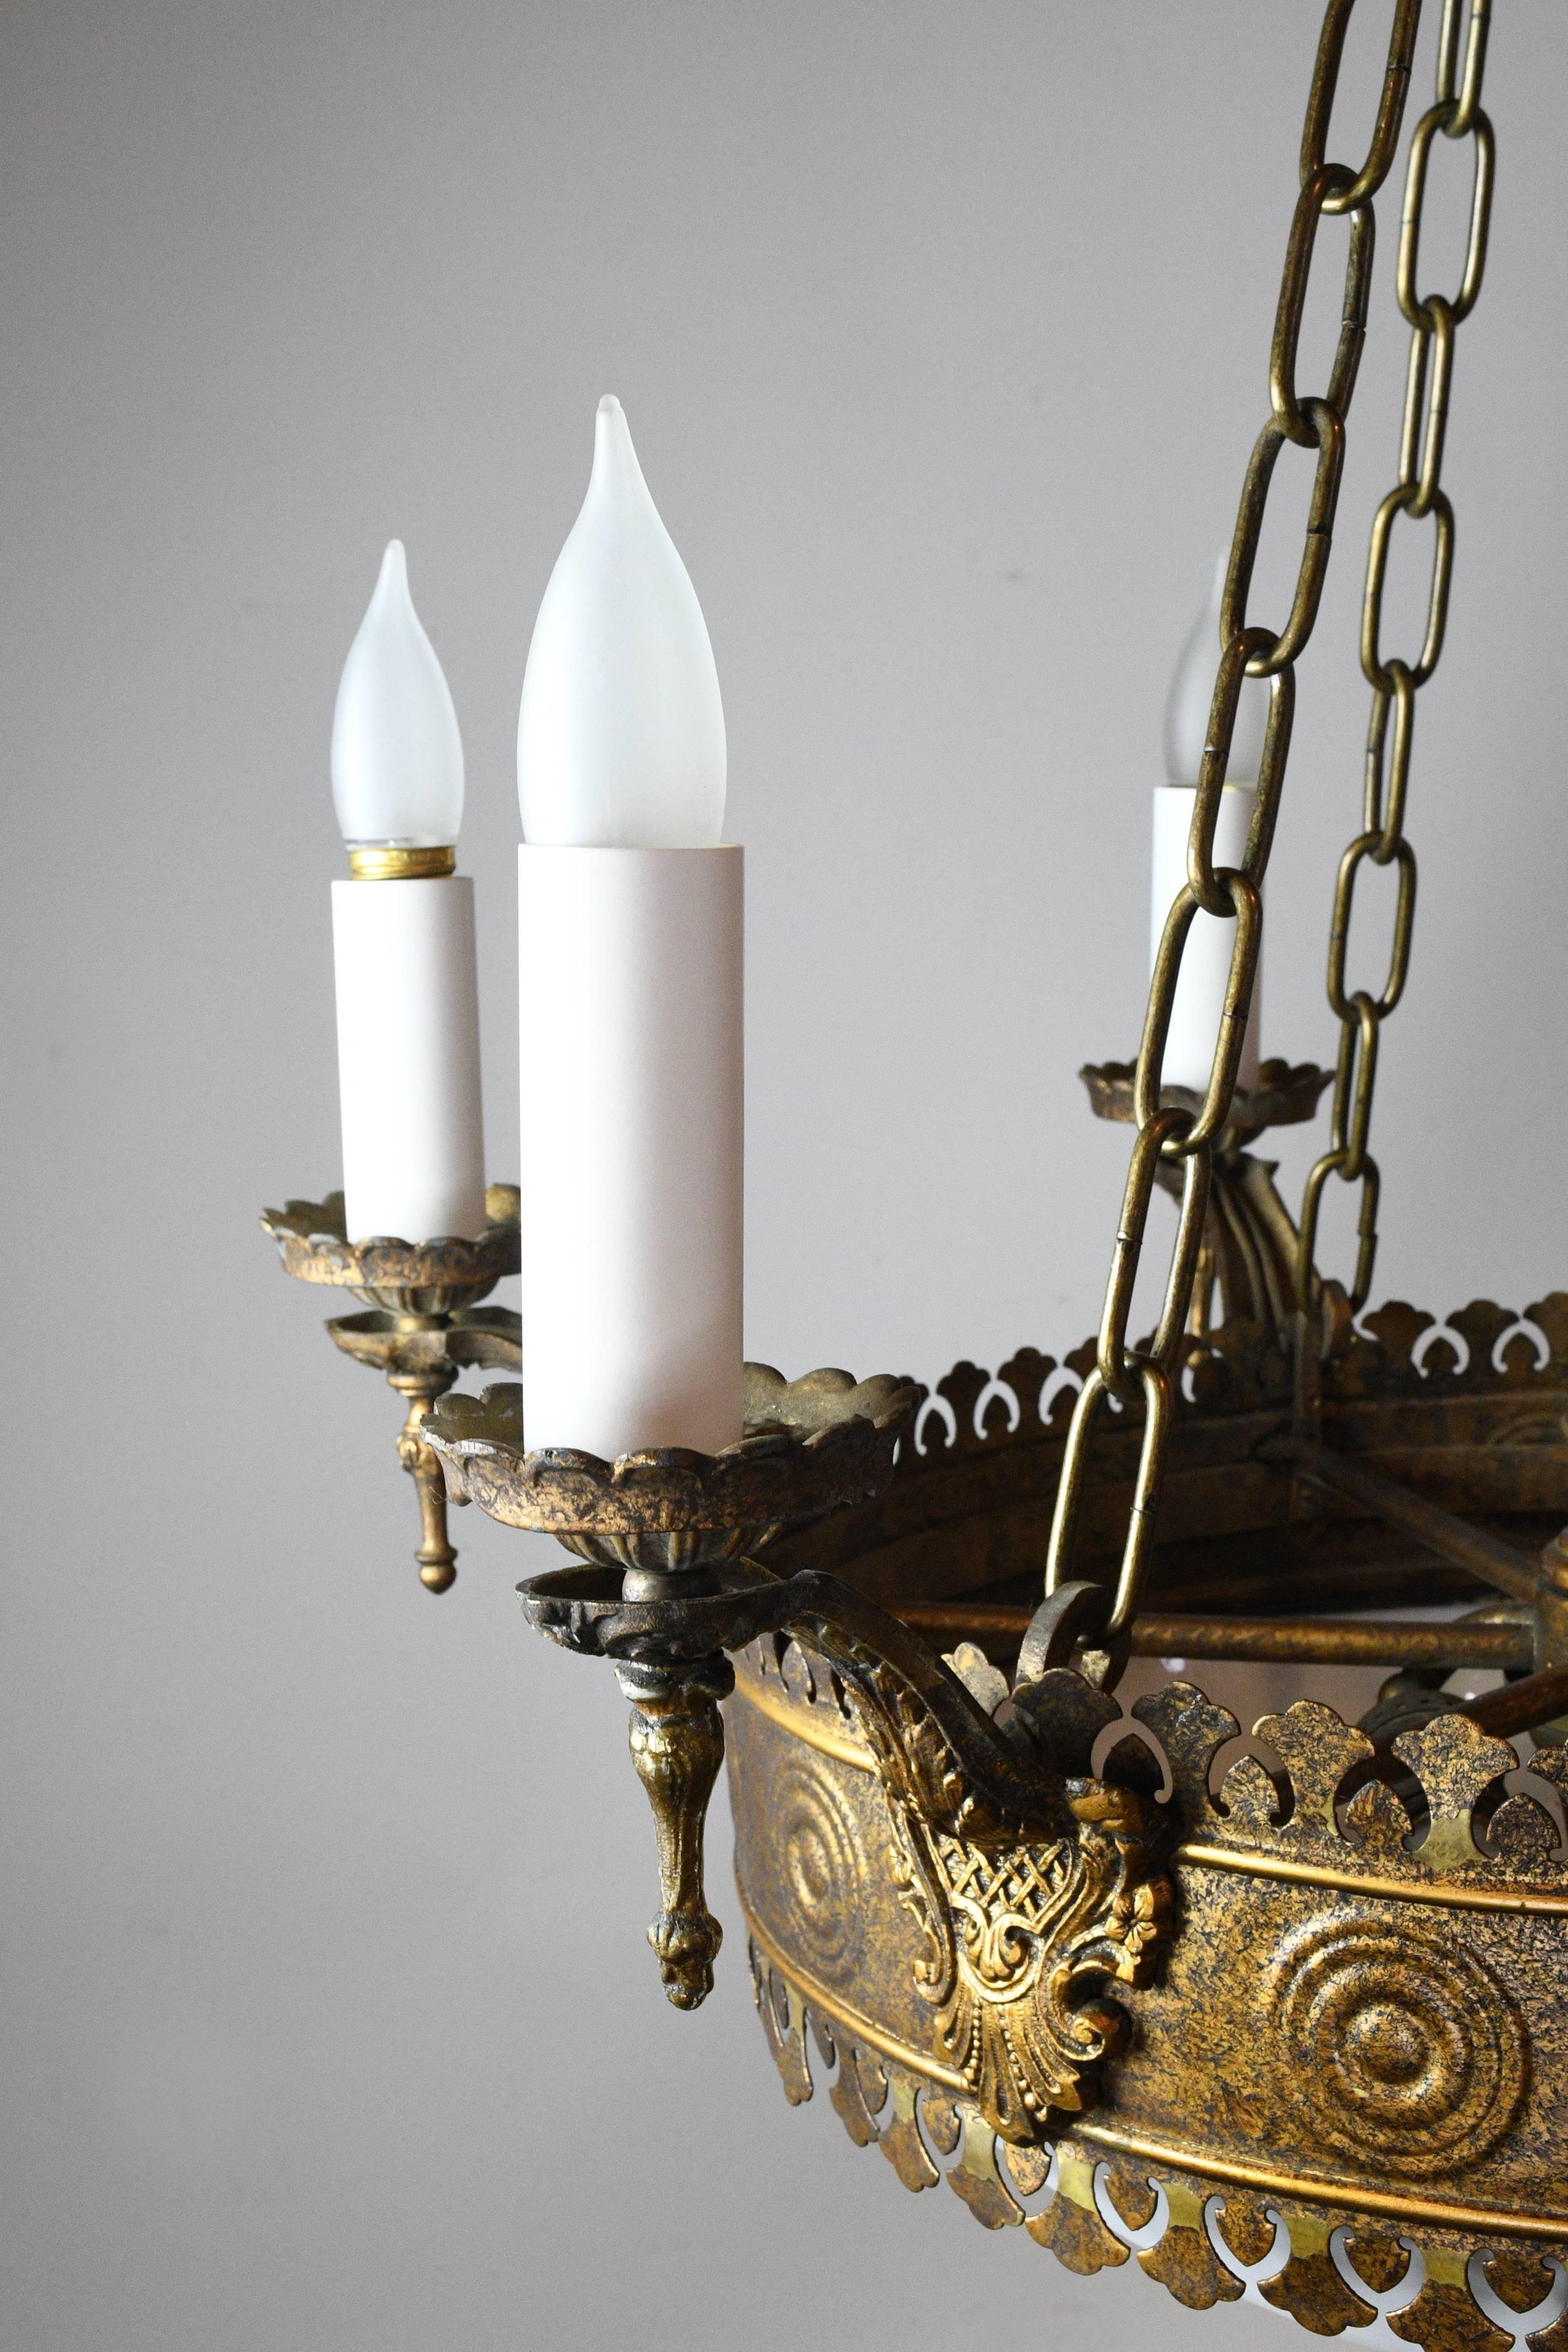 This brass chandelier has six candle holders surrounding the exterior, while three interior sockets illuminate the bent glass globe. The chandelier has Tudor motifs and intricate cutout detailing throughout. Beneath the white globe is a delicate